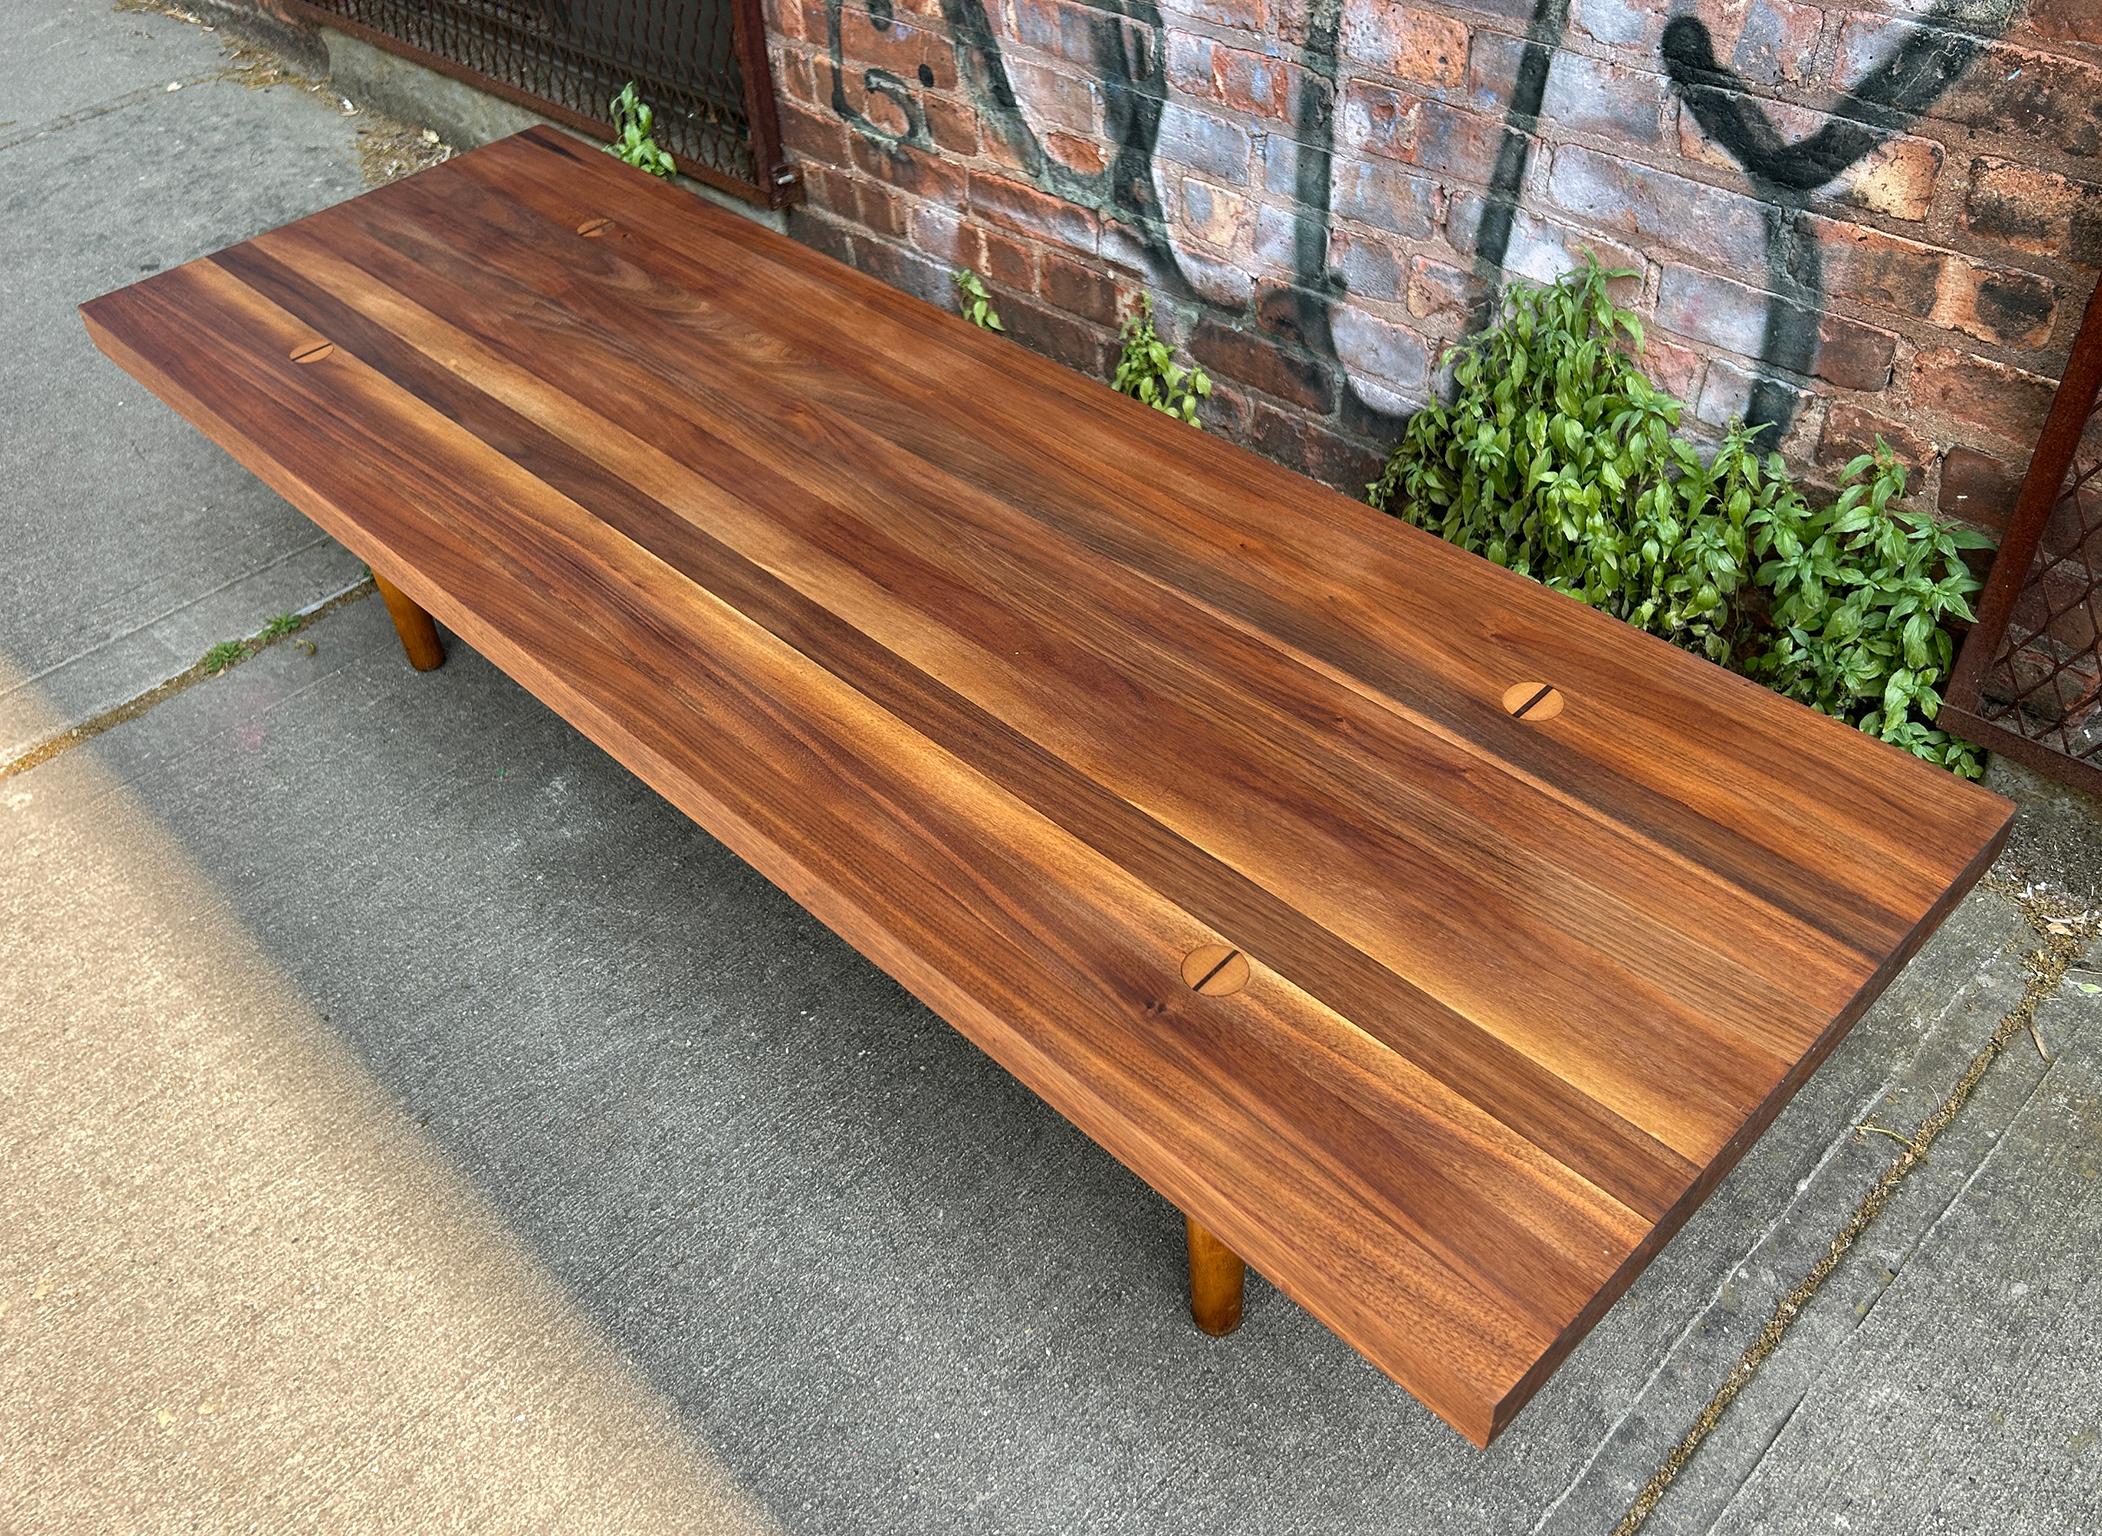 Great midcentury American Studio Craft Arts solid beautiful Hardwood & walnut Long Coffee table or bench . Gorgeous black walnut joined sections on solid Ash wood turned legs with highly crafted joinery. Made circa 1960. Located In Brooklyn